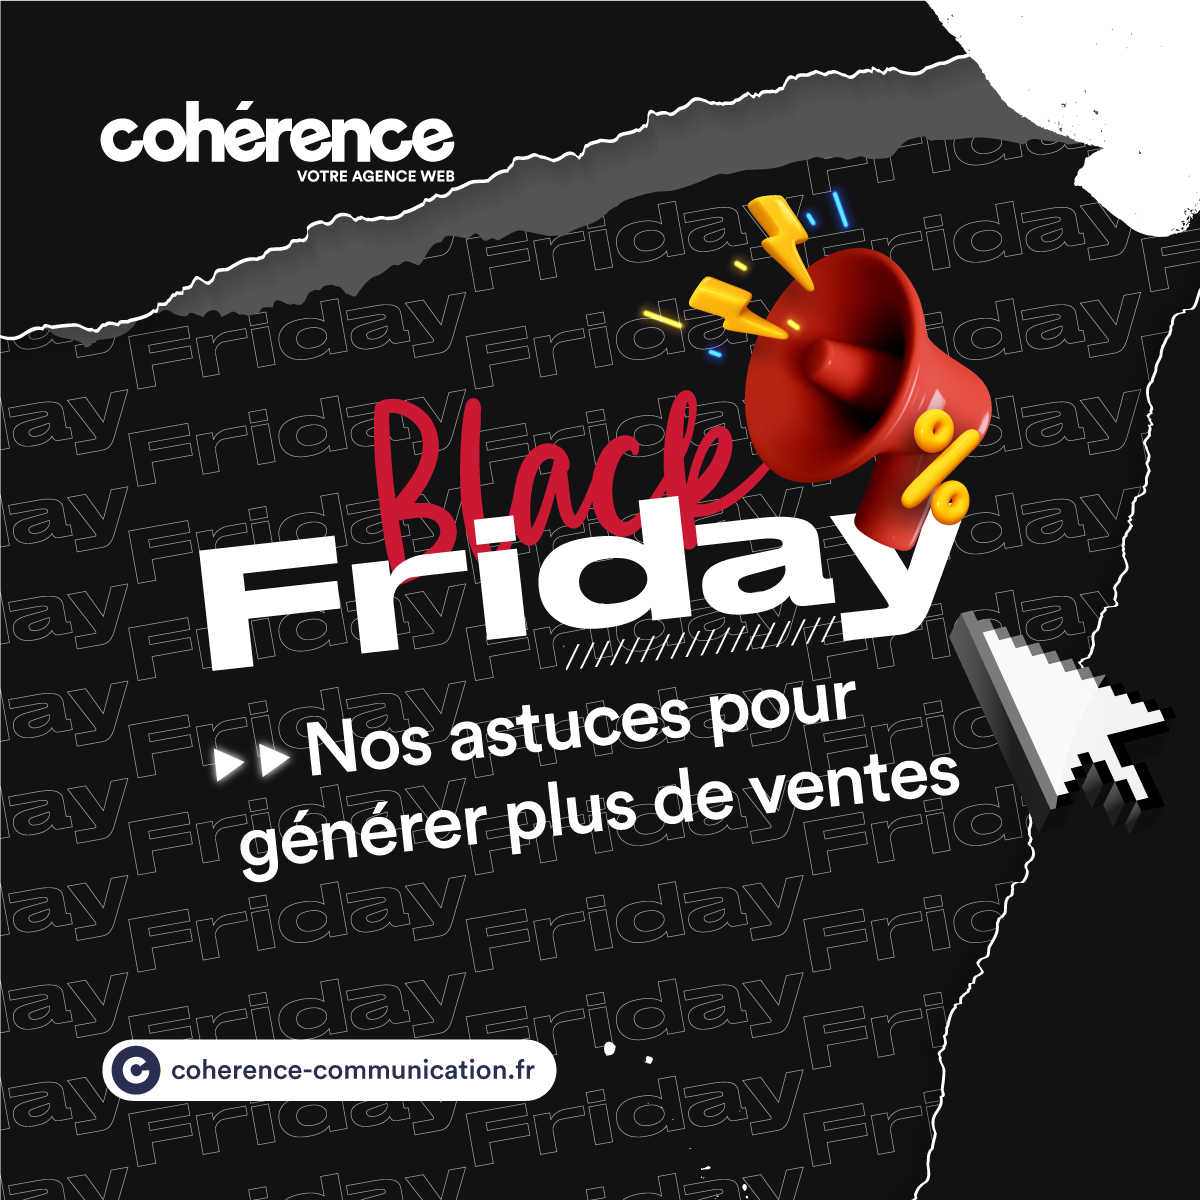 Coherence Agence Web Conseils Black Friday pour booster vos ventes